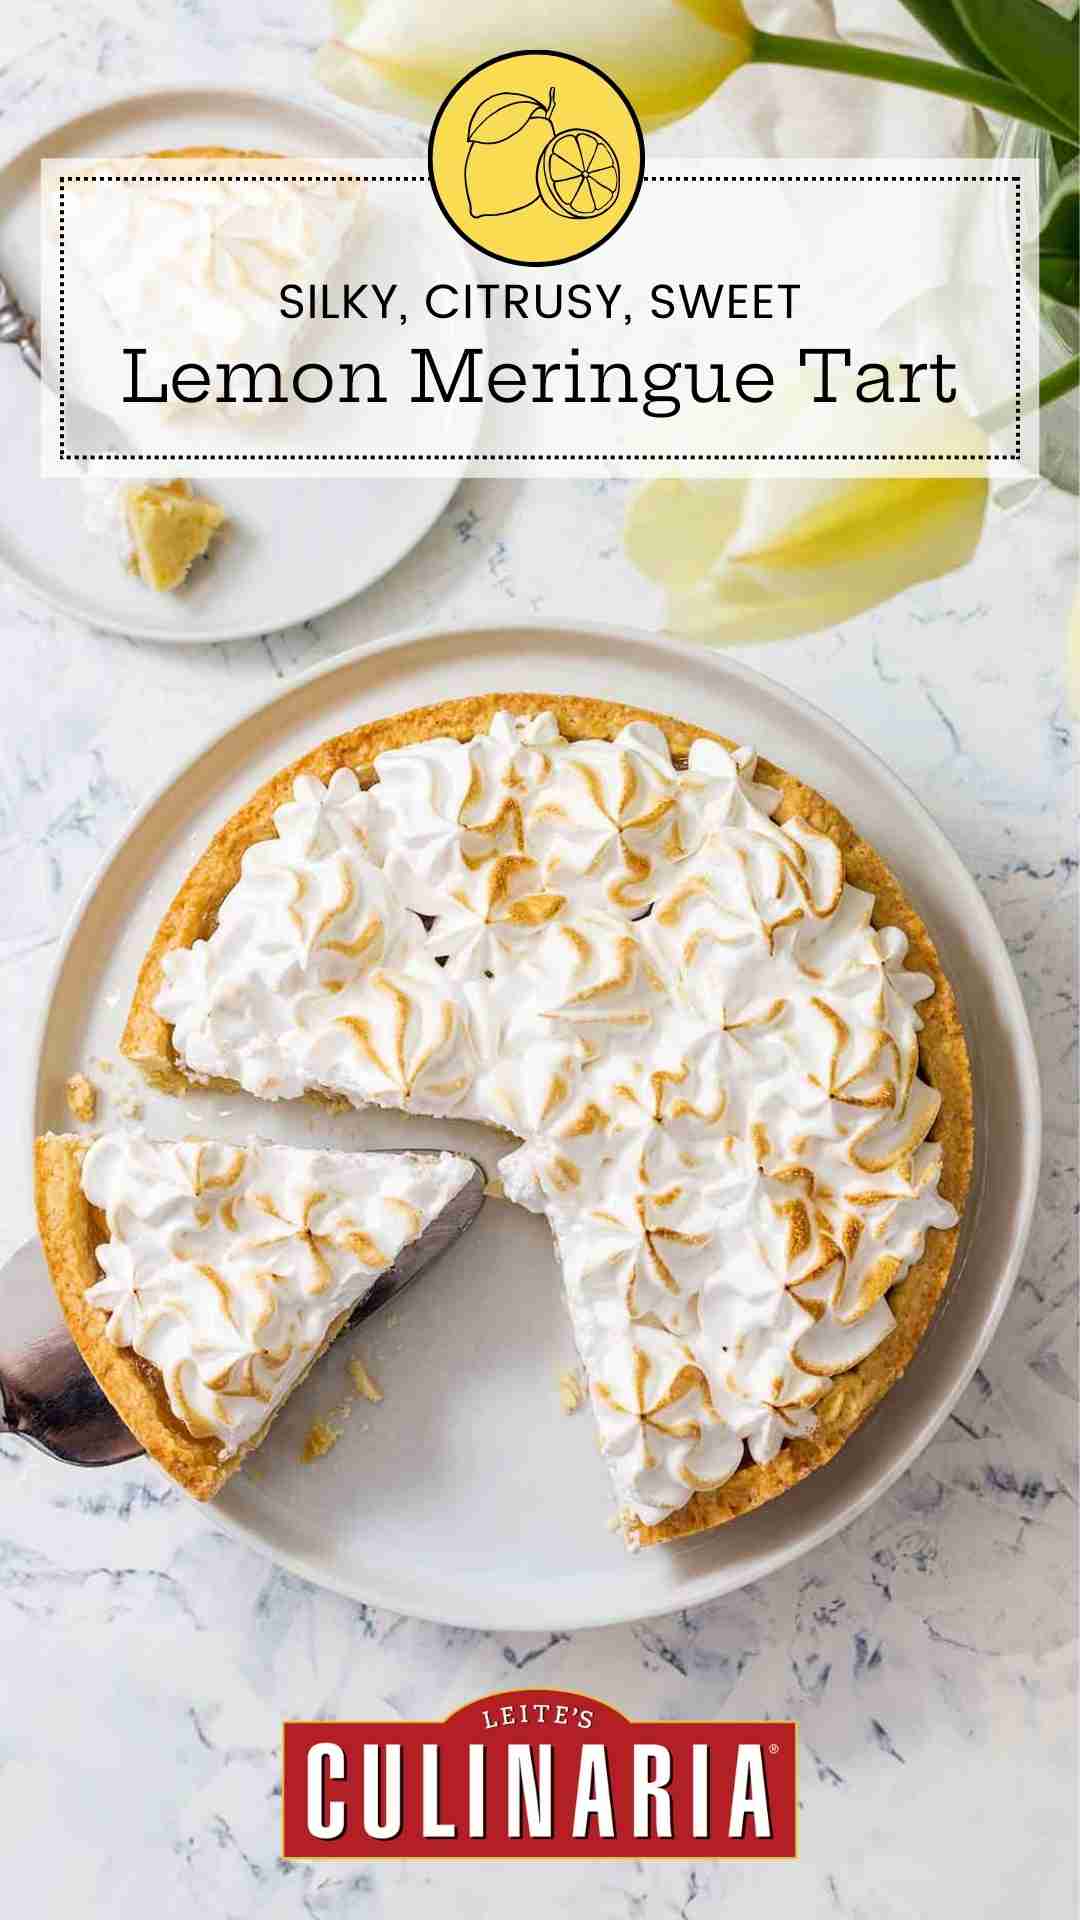 A lemon meringue tart in a white dish, with one slice on a plate beside it and one more being lifted out.